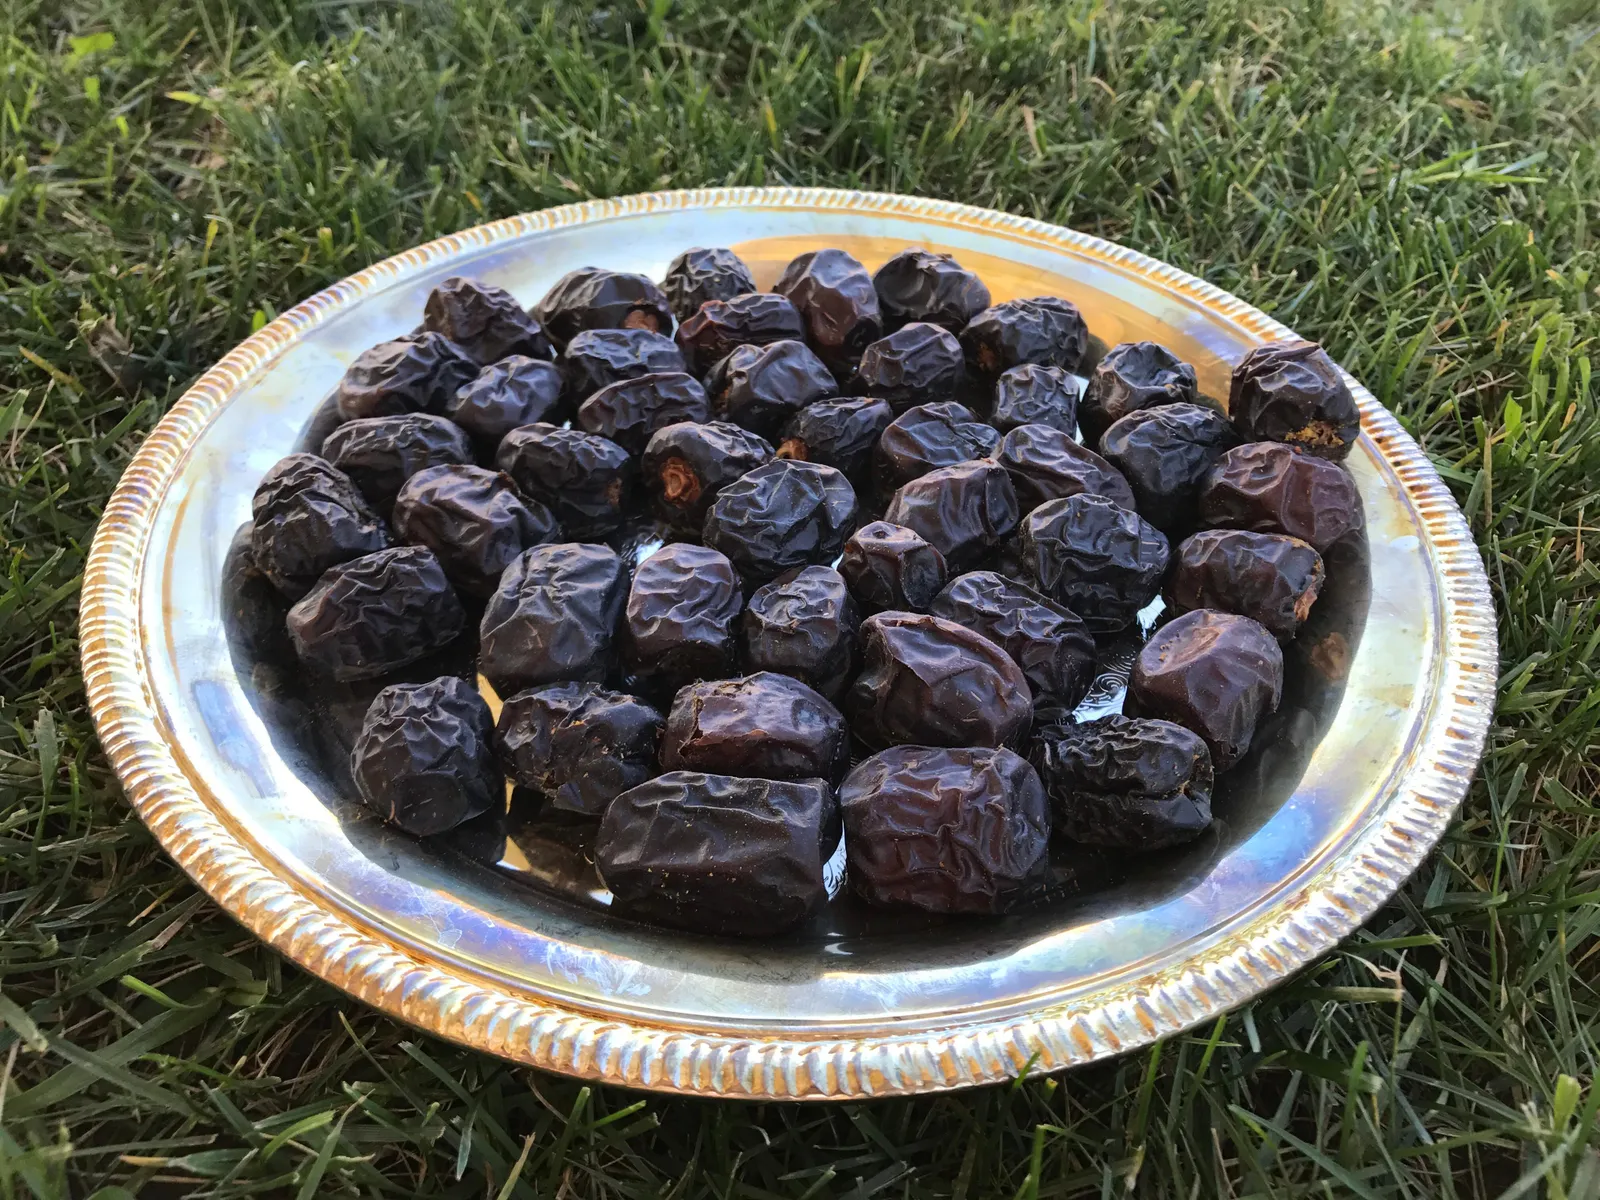 Dates: An Ancient Fruit Rediscovered, Food & Nutrition Magazine